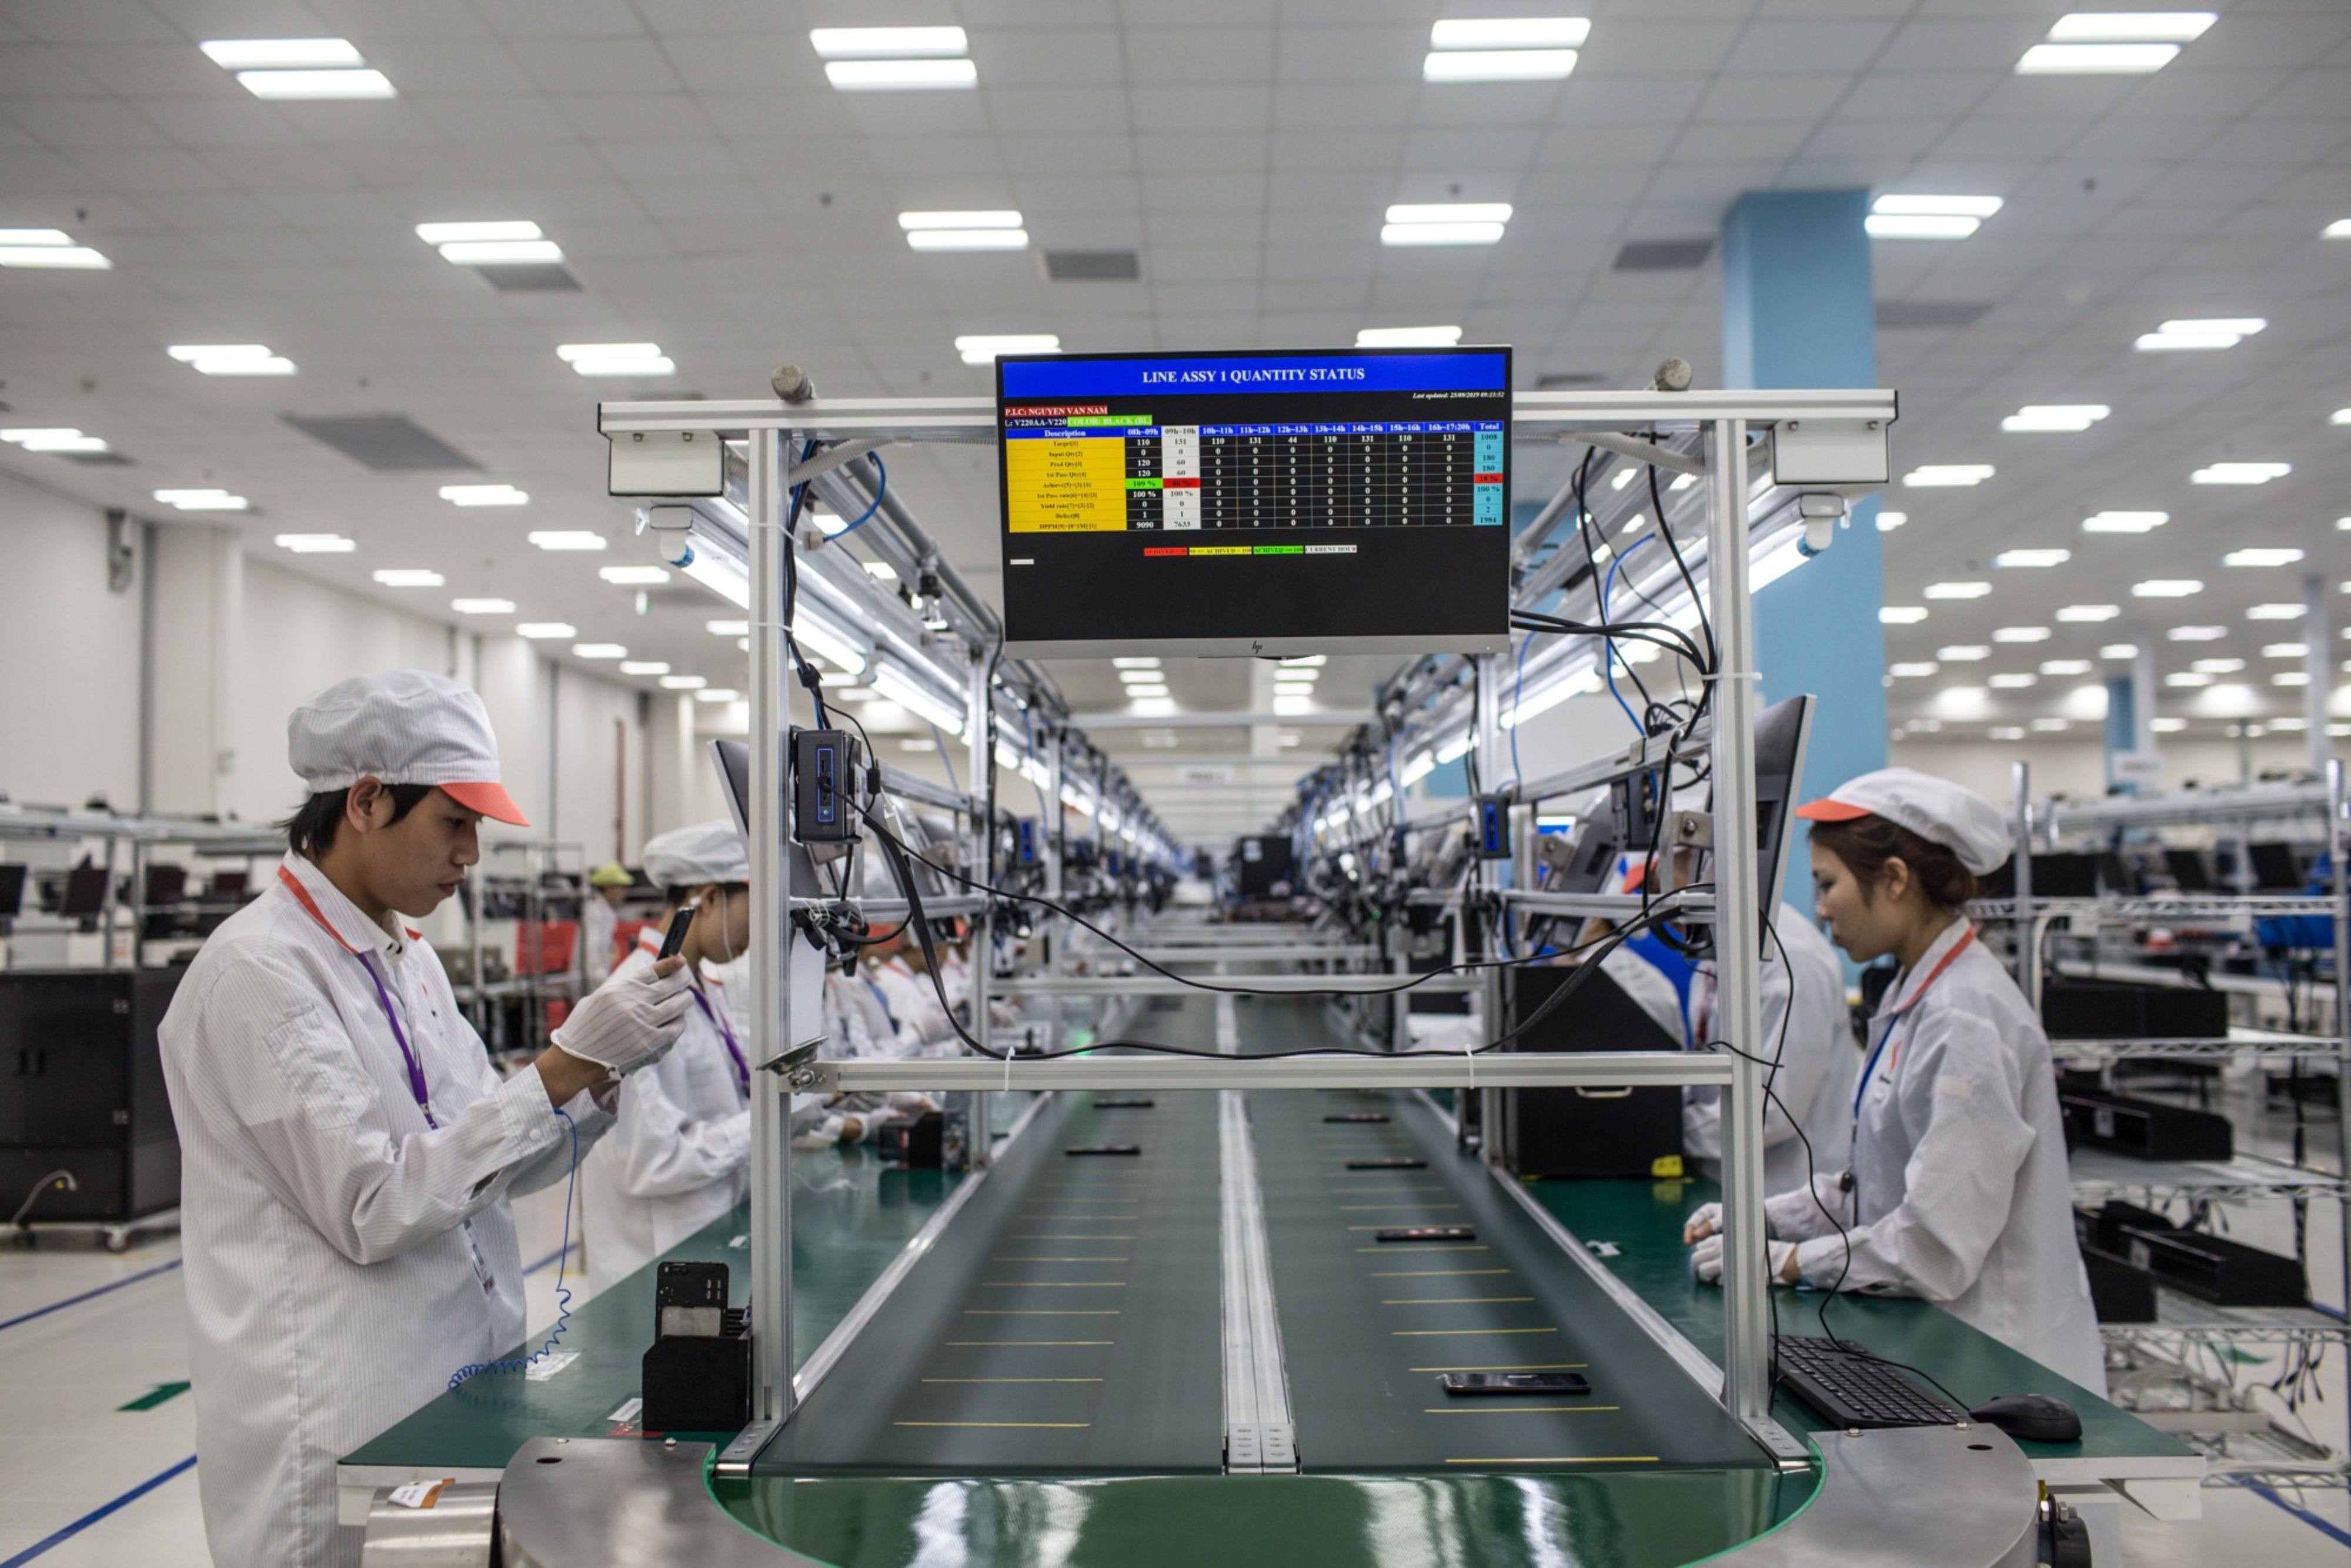 Vietnam is viewed as gaining during the US-China trade war that started in 2018. Now, Washington has made further pledges that could further alter Vietnam’s importance in the manufacturing value chain. Photo: Bloomberg